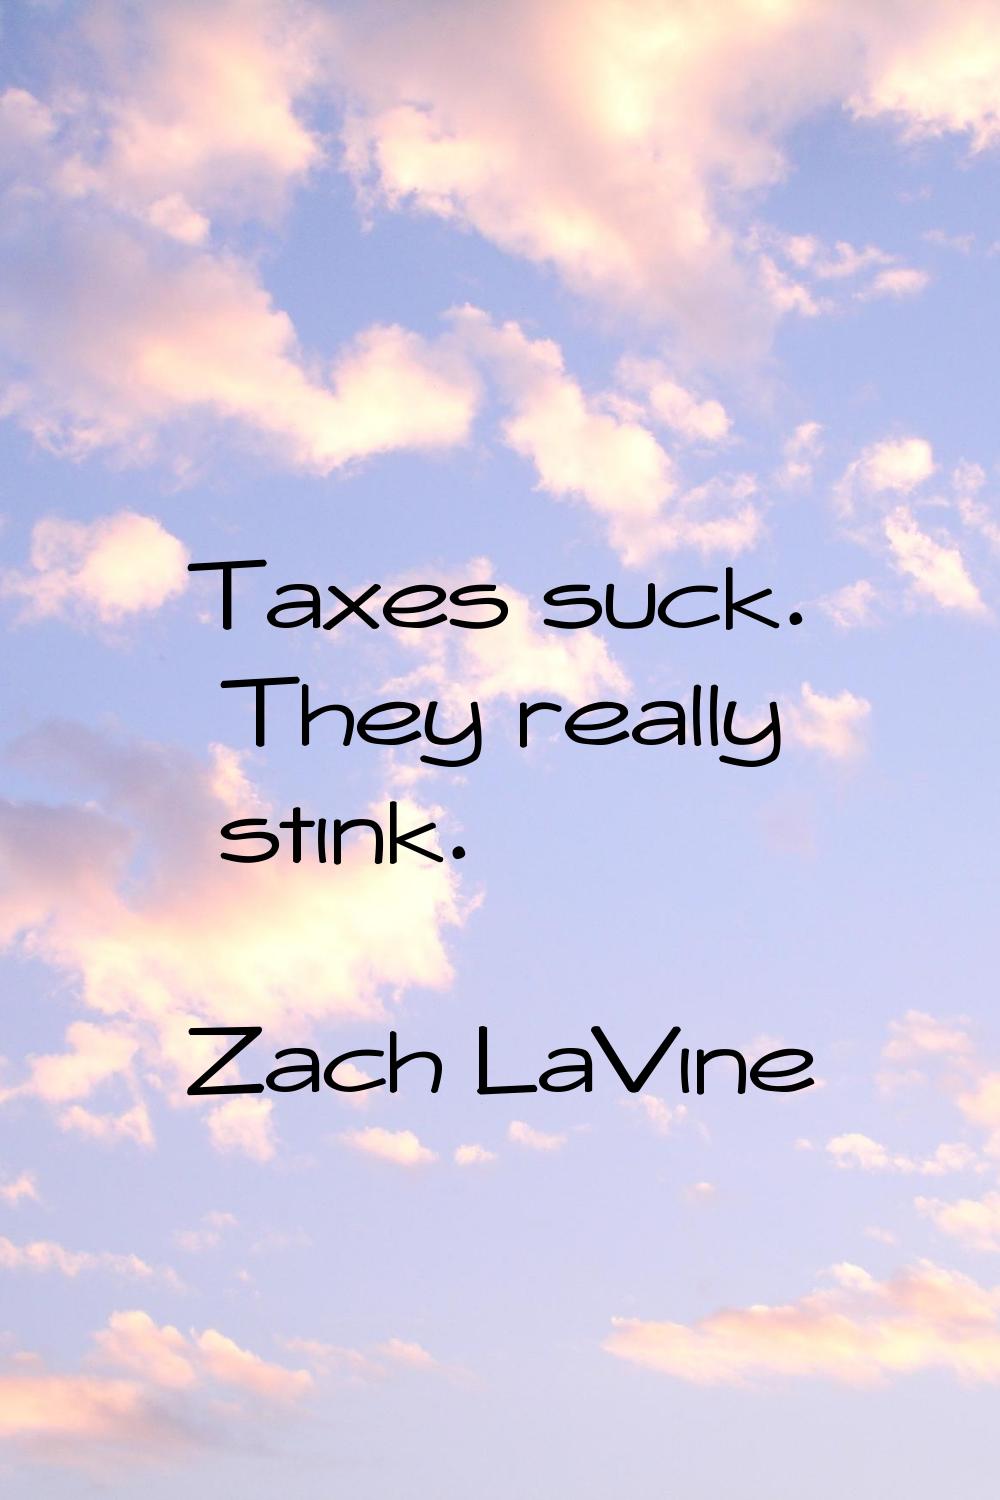 Taxes suck. They really stink.